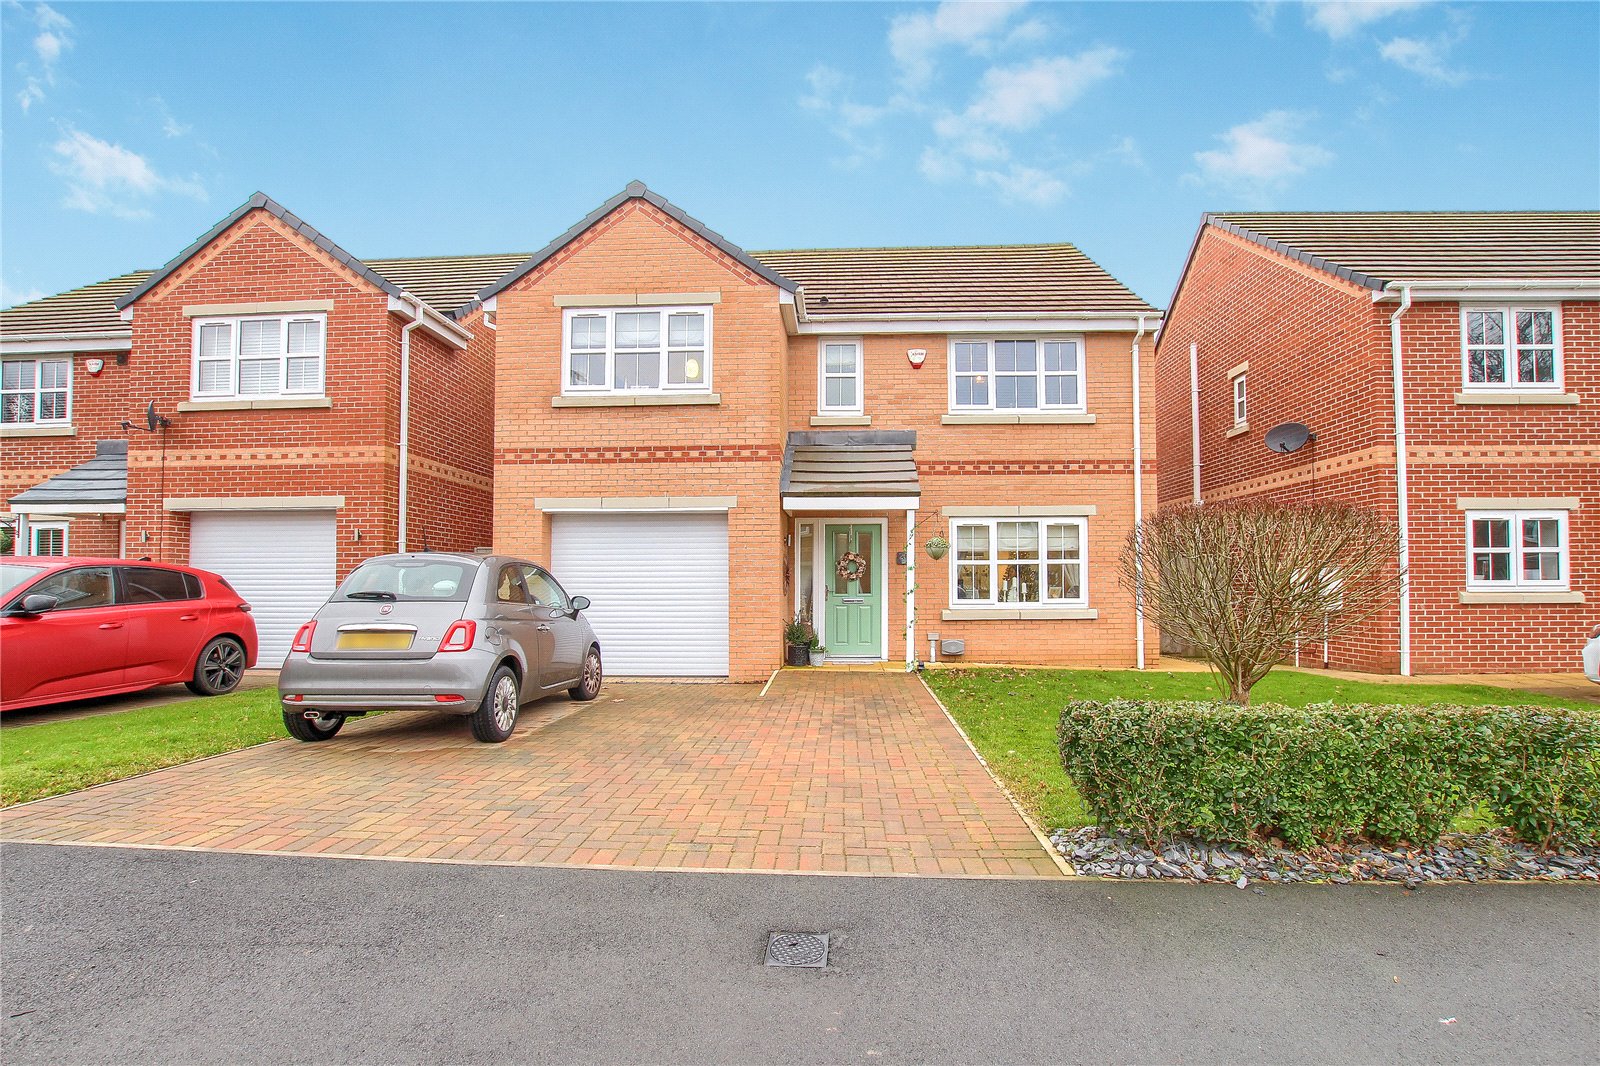 4 bed house for sale in Bassleton Court, Stockton-on-Tees - Property Image 1